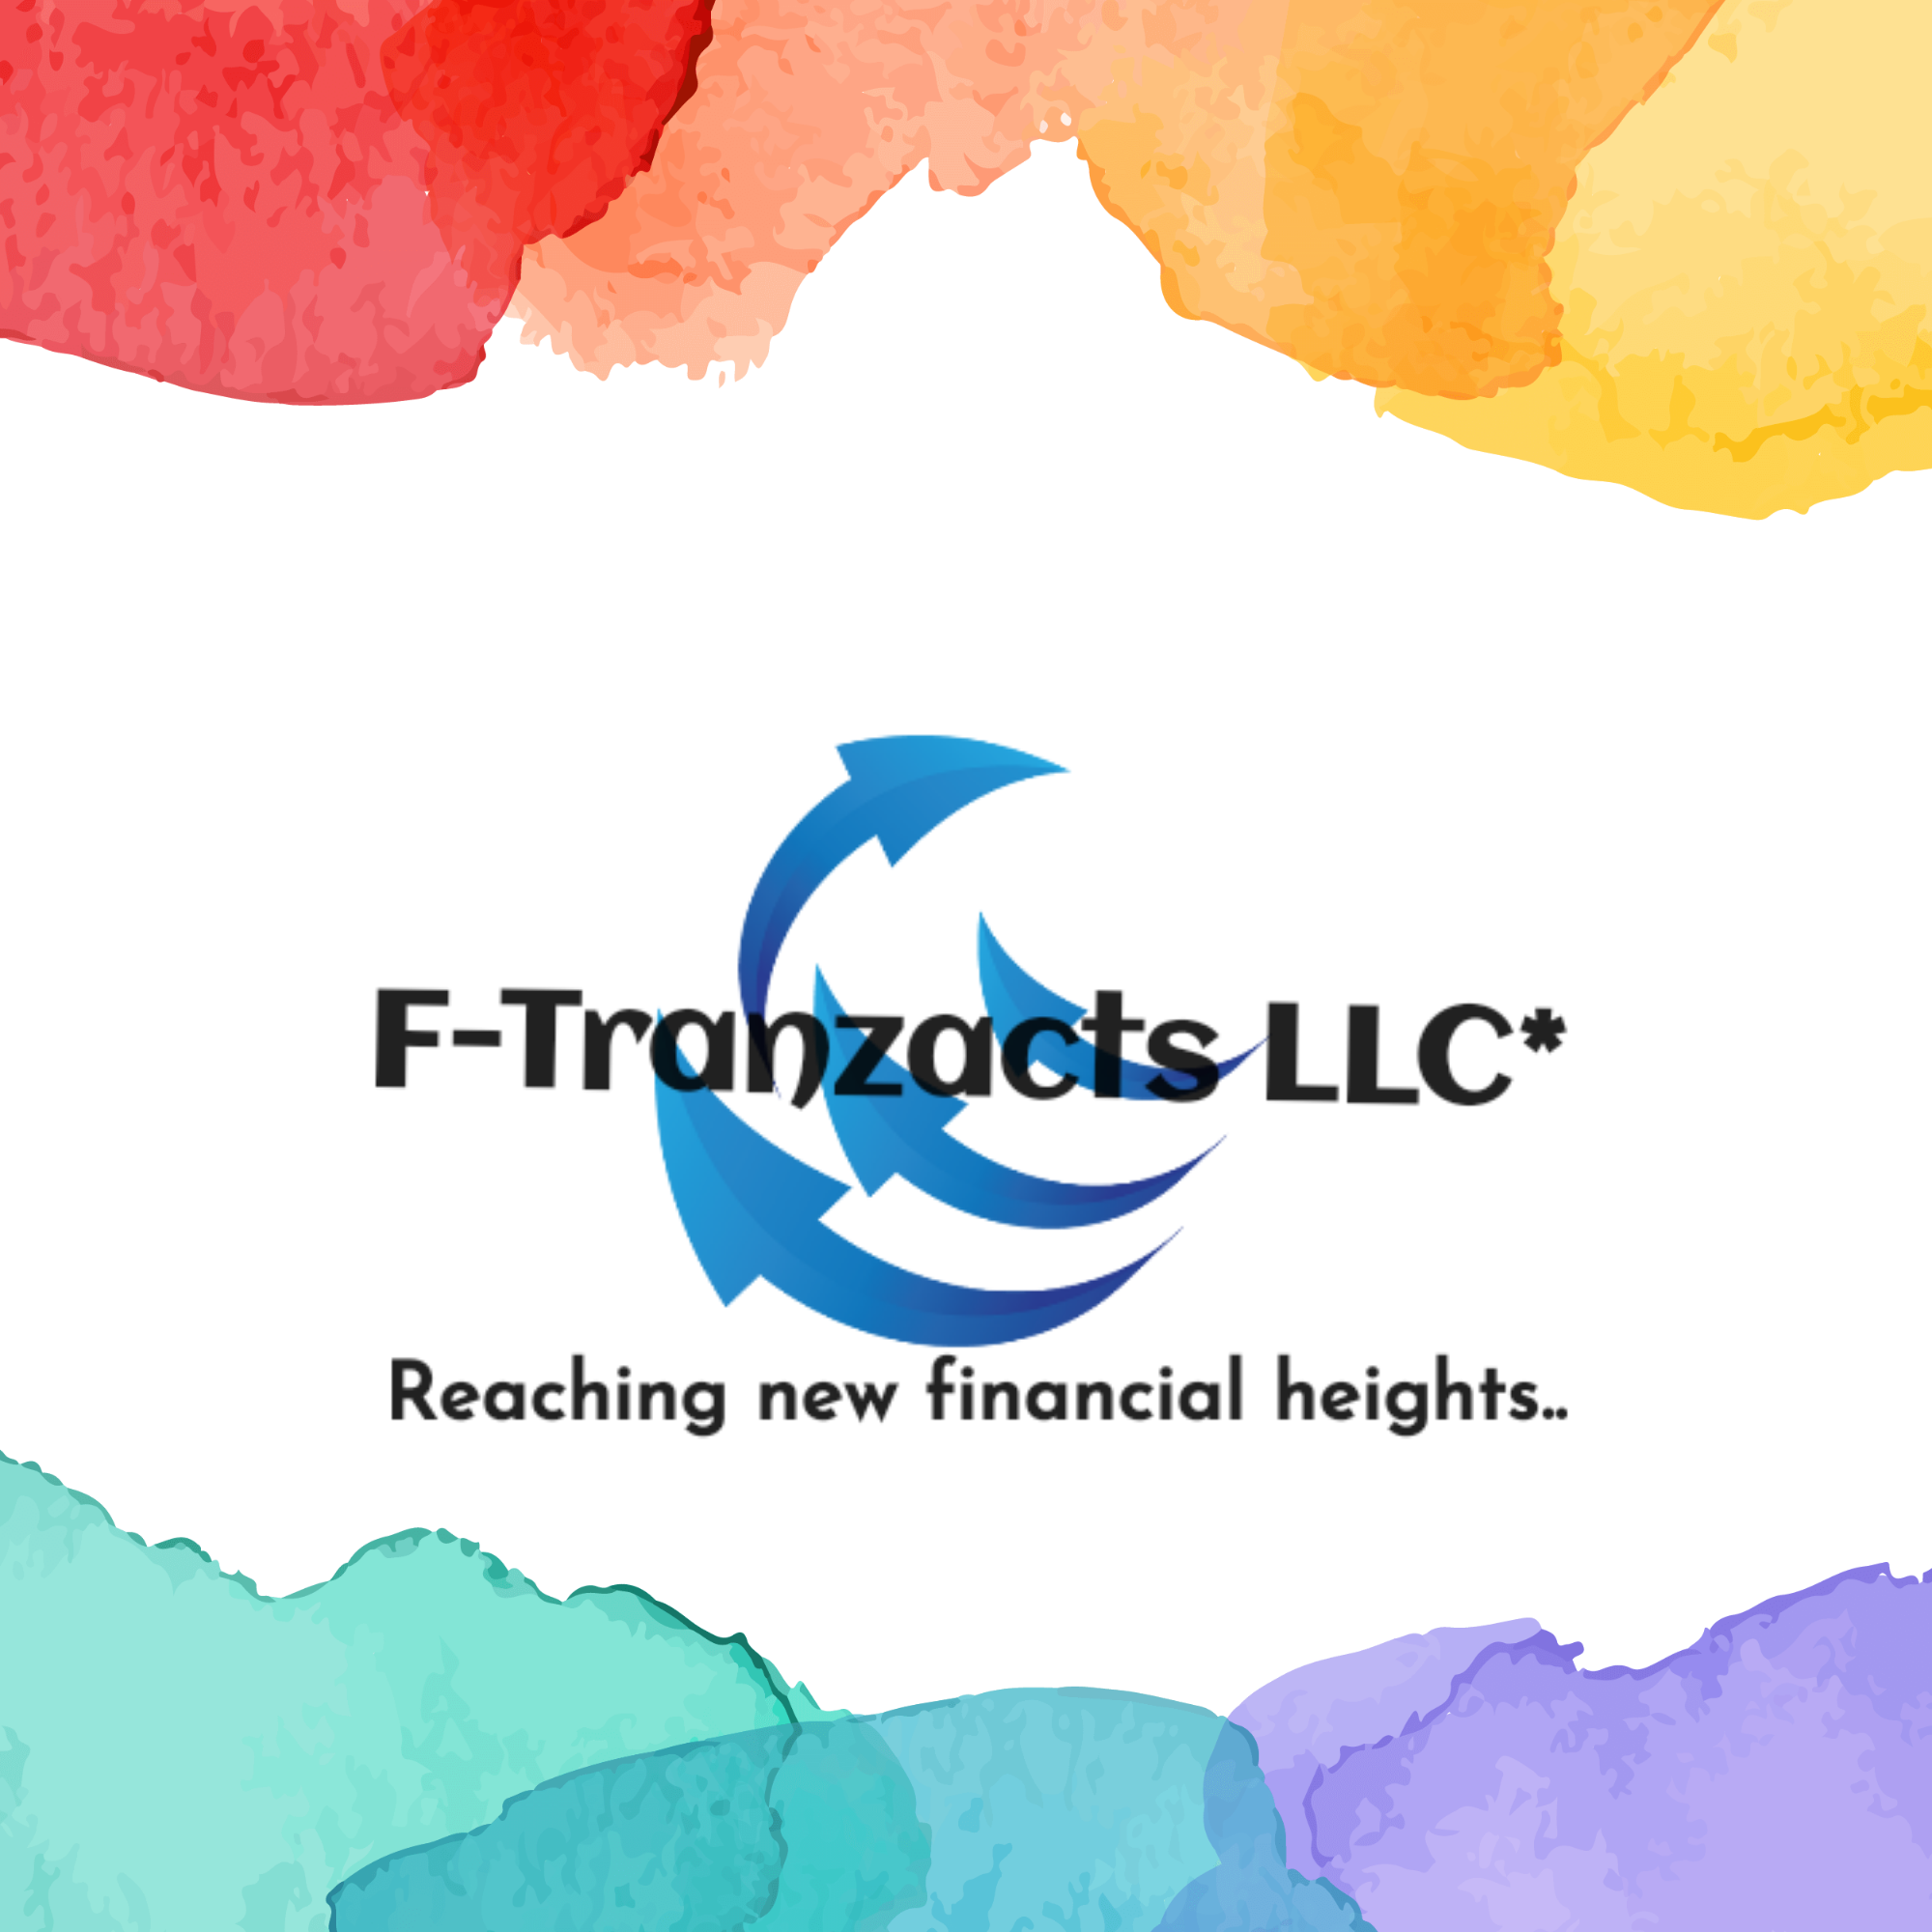 The F-Tranzacts Group Logo